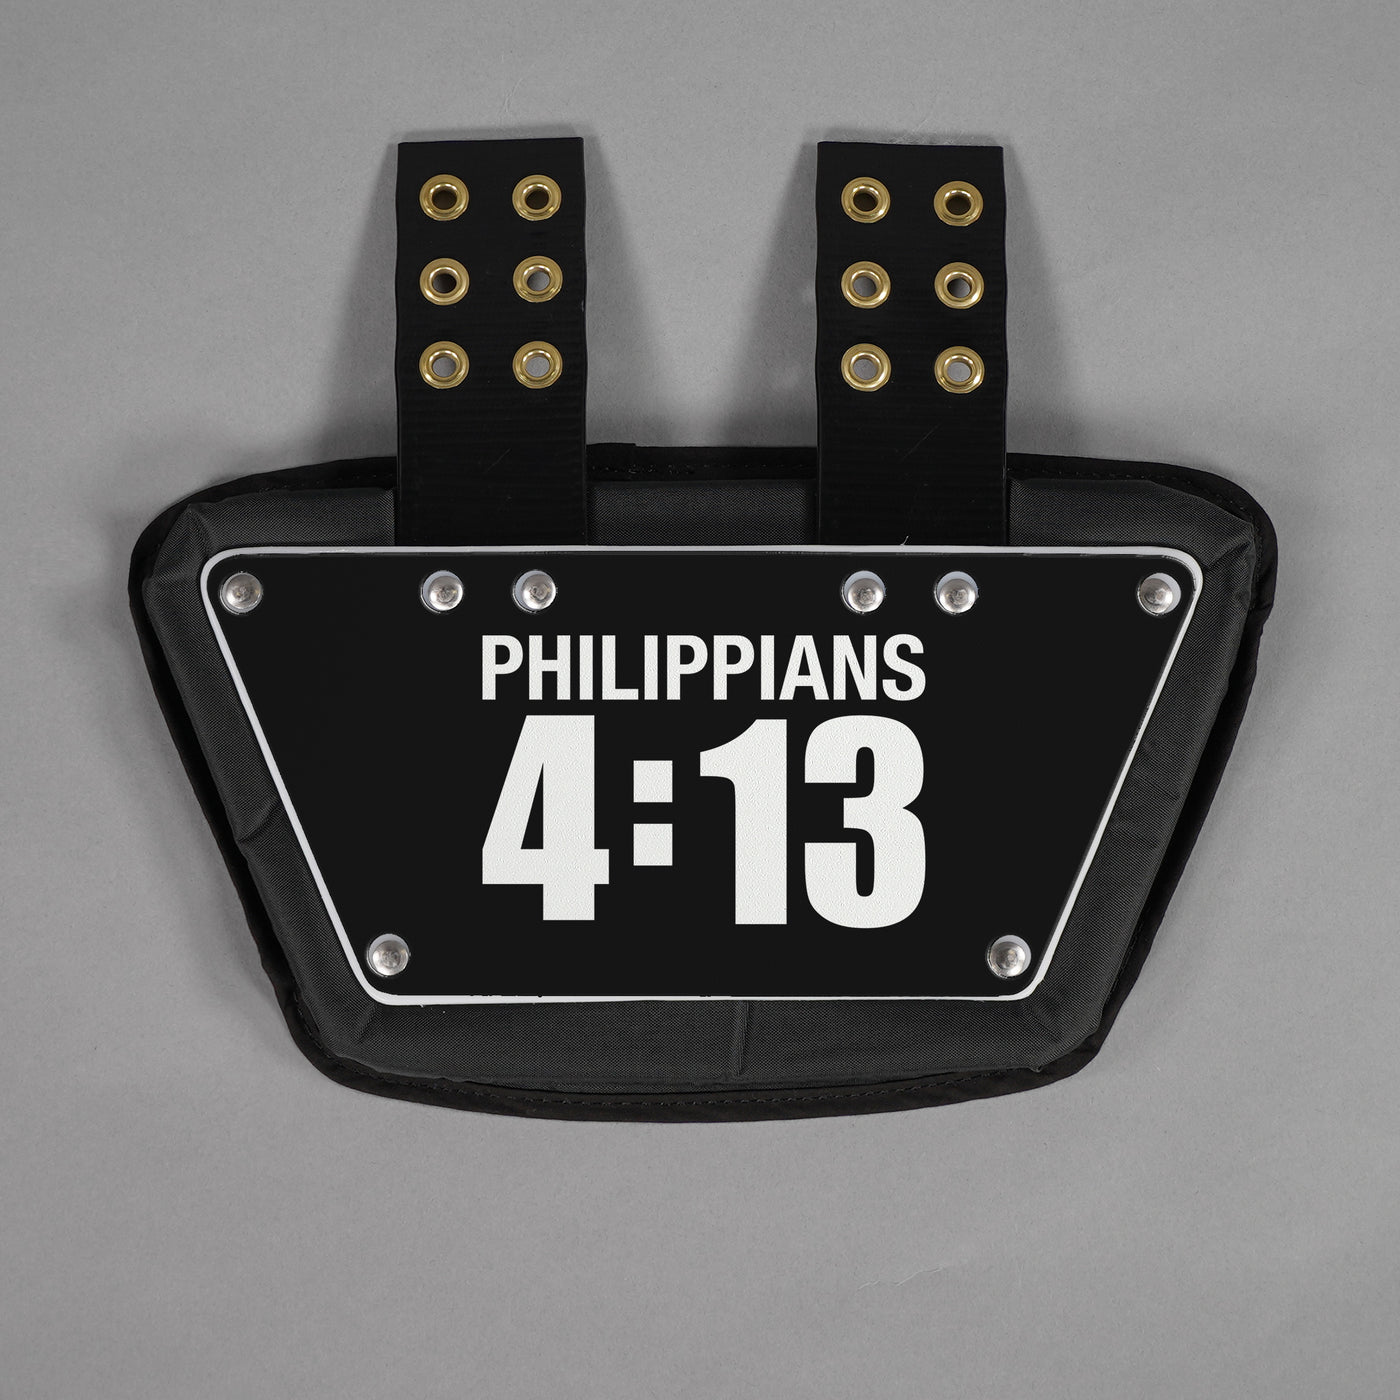 Philippians 4:13 Sticker for Back Plate